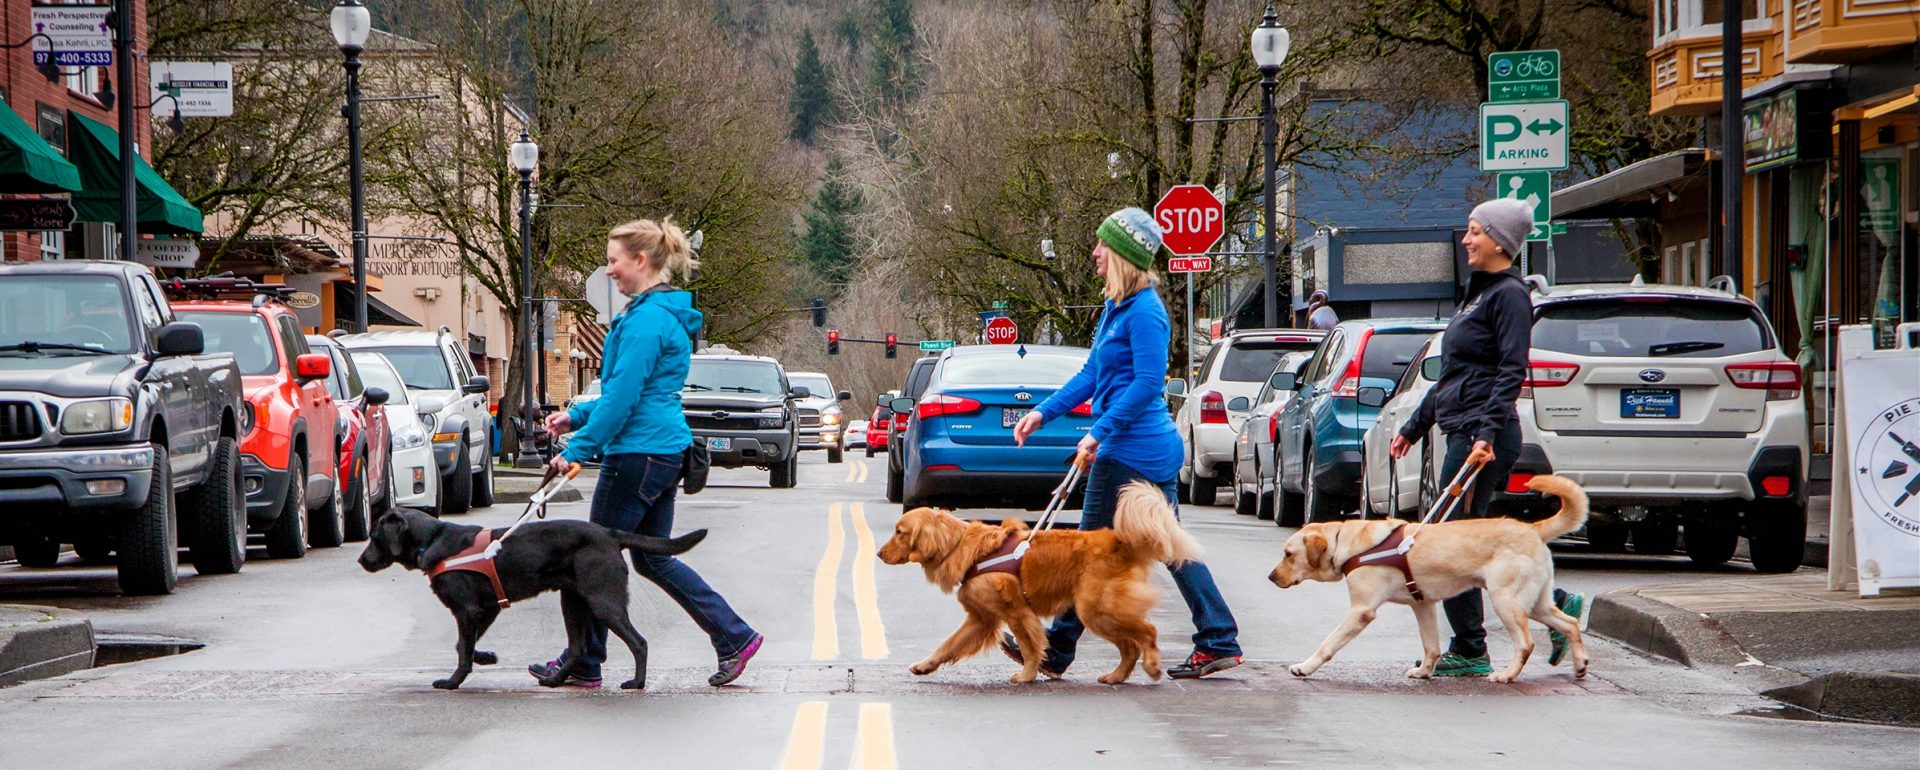 Three guide dog mobility instructors crossing a street with guide dogs in training.